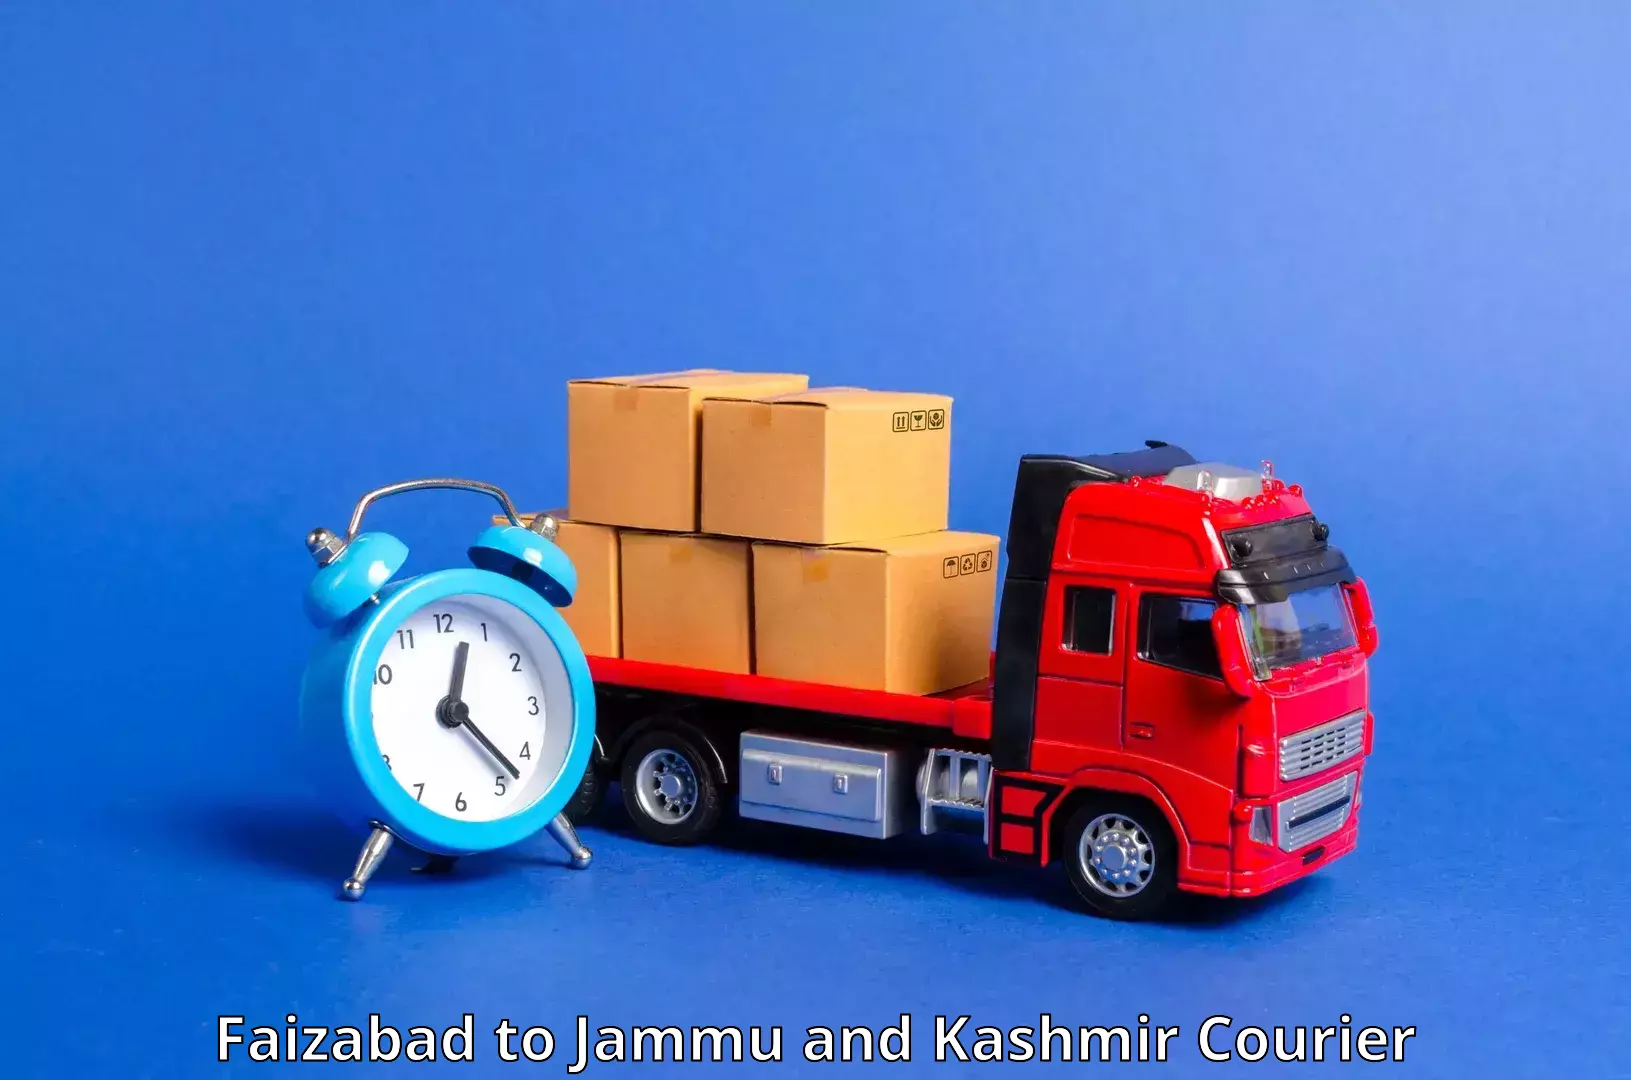 Subscription-based courier Faizabad to Jakh